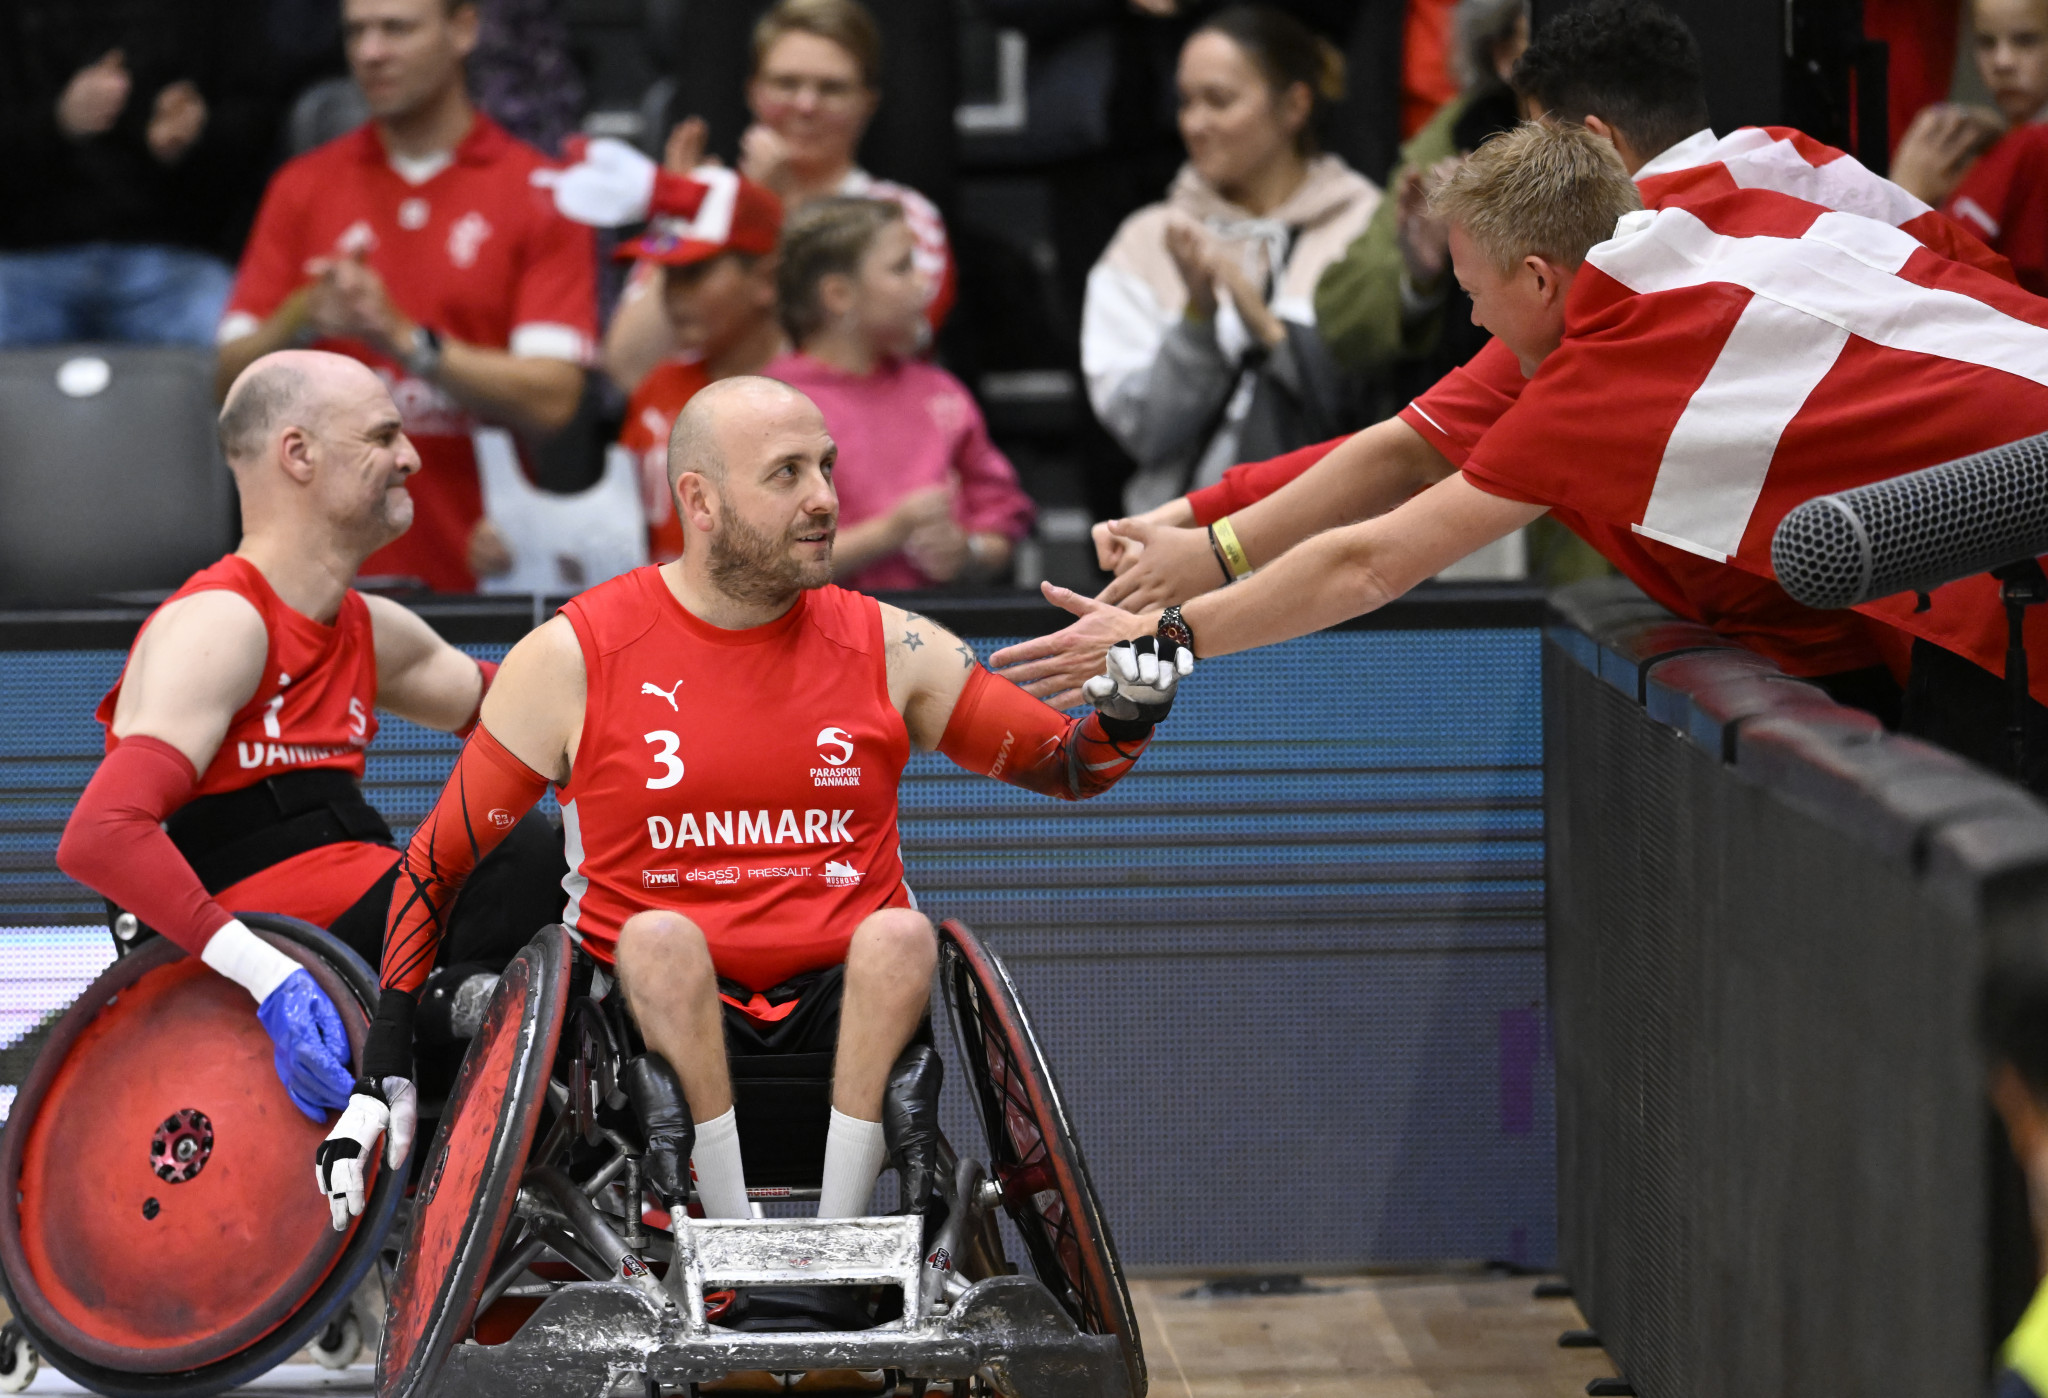 Danish players thanked the home crowd for their support after their match against Japan ©Lars Møller/Parasport Denmark